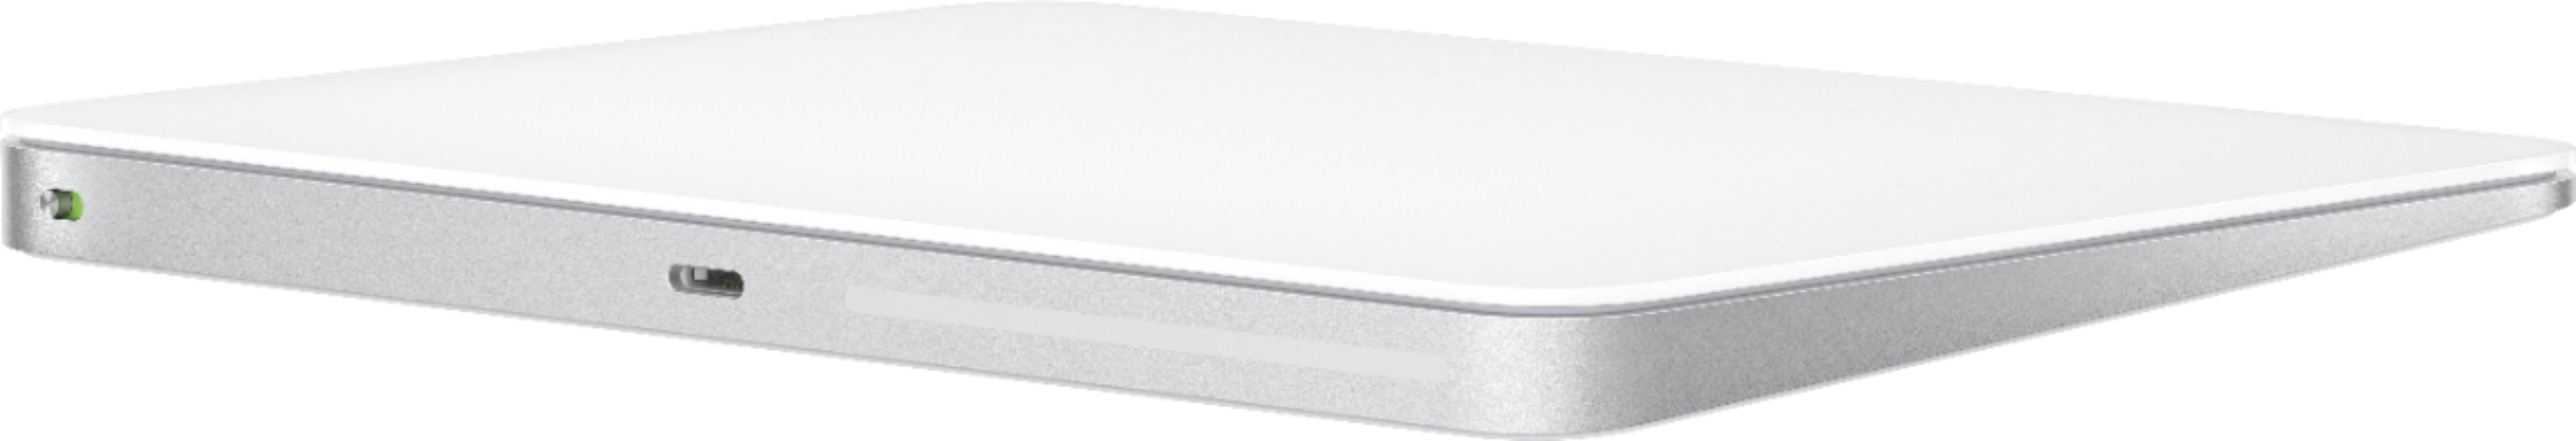 Magic Trackpad - White Multi-Touch Surface - Apple